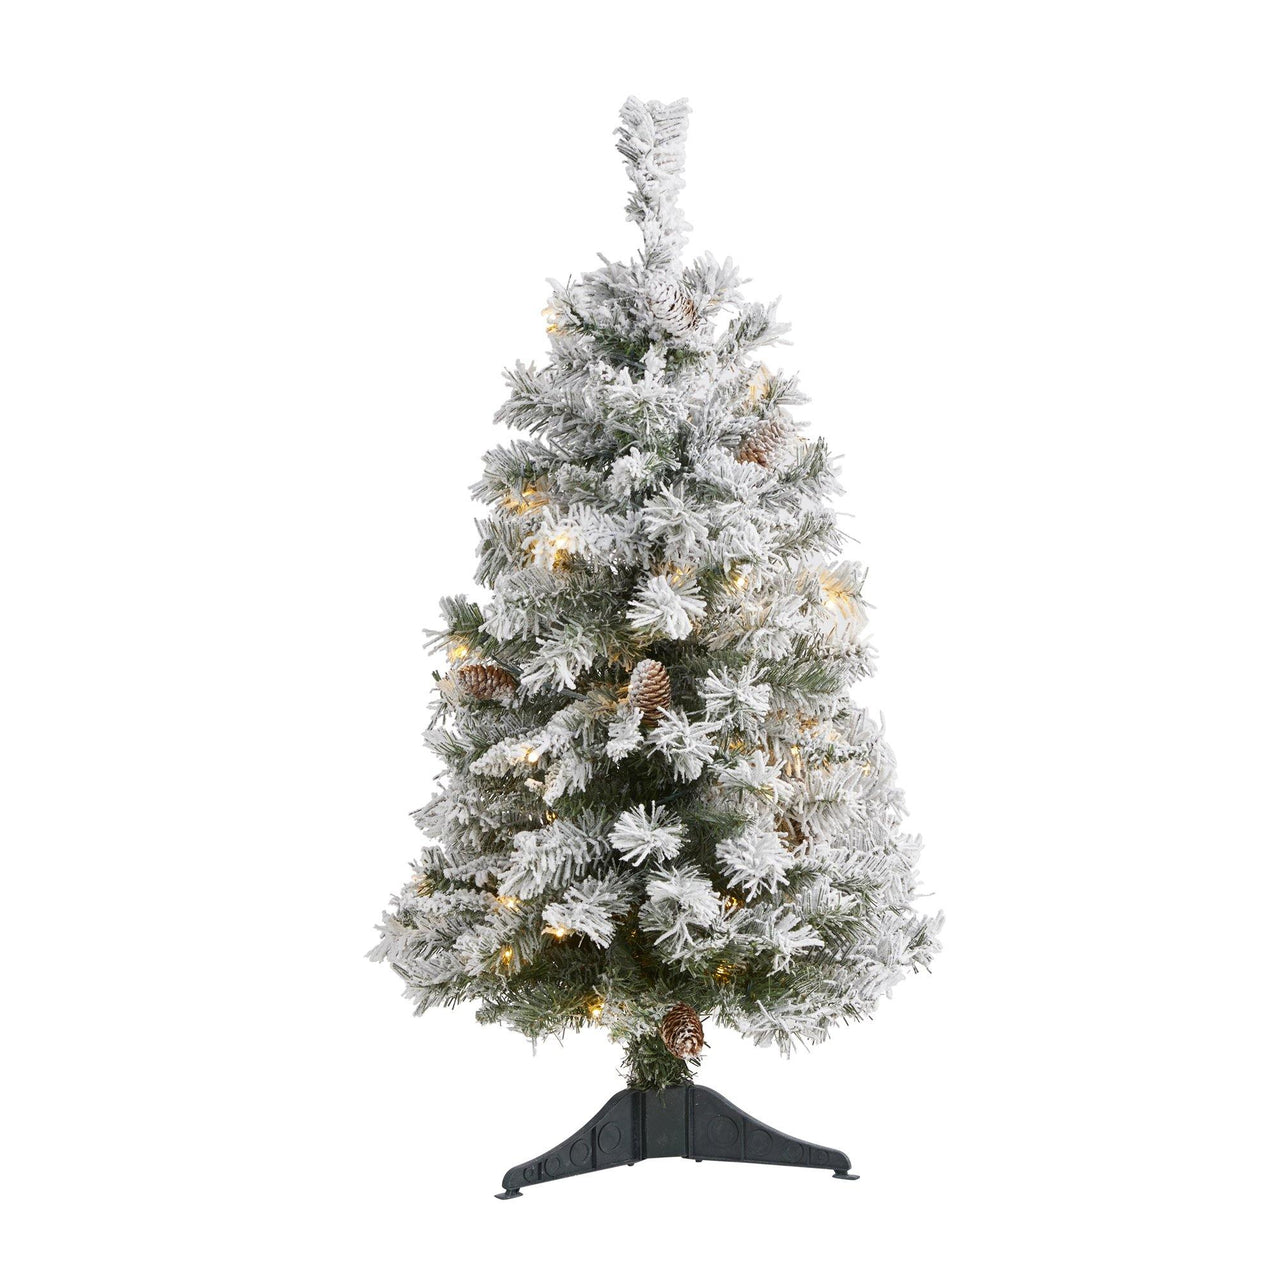 3' Flocked White River Mountain Pine Artificial Christmas Tree with Pinecones and 50 Clear LED Lights